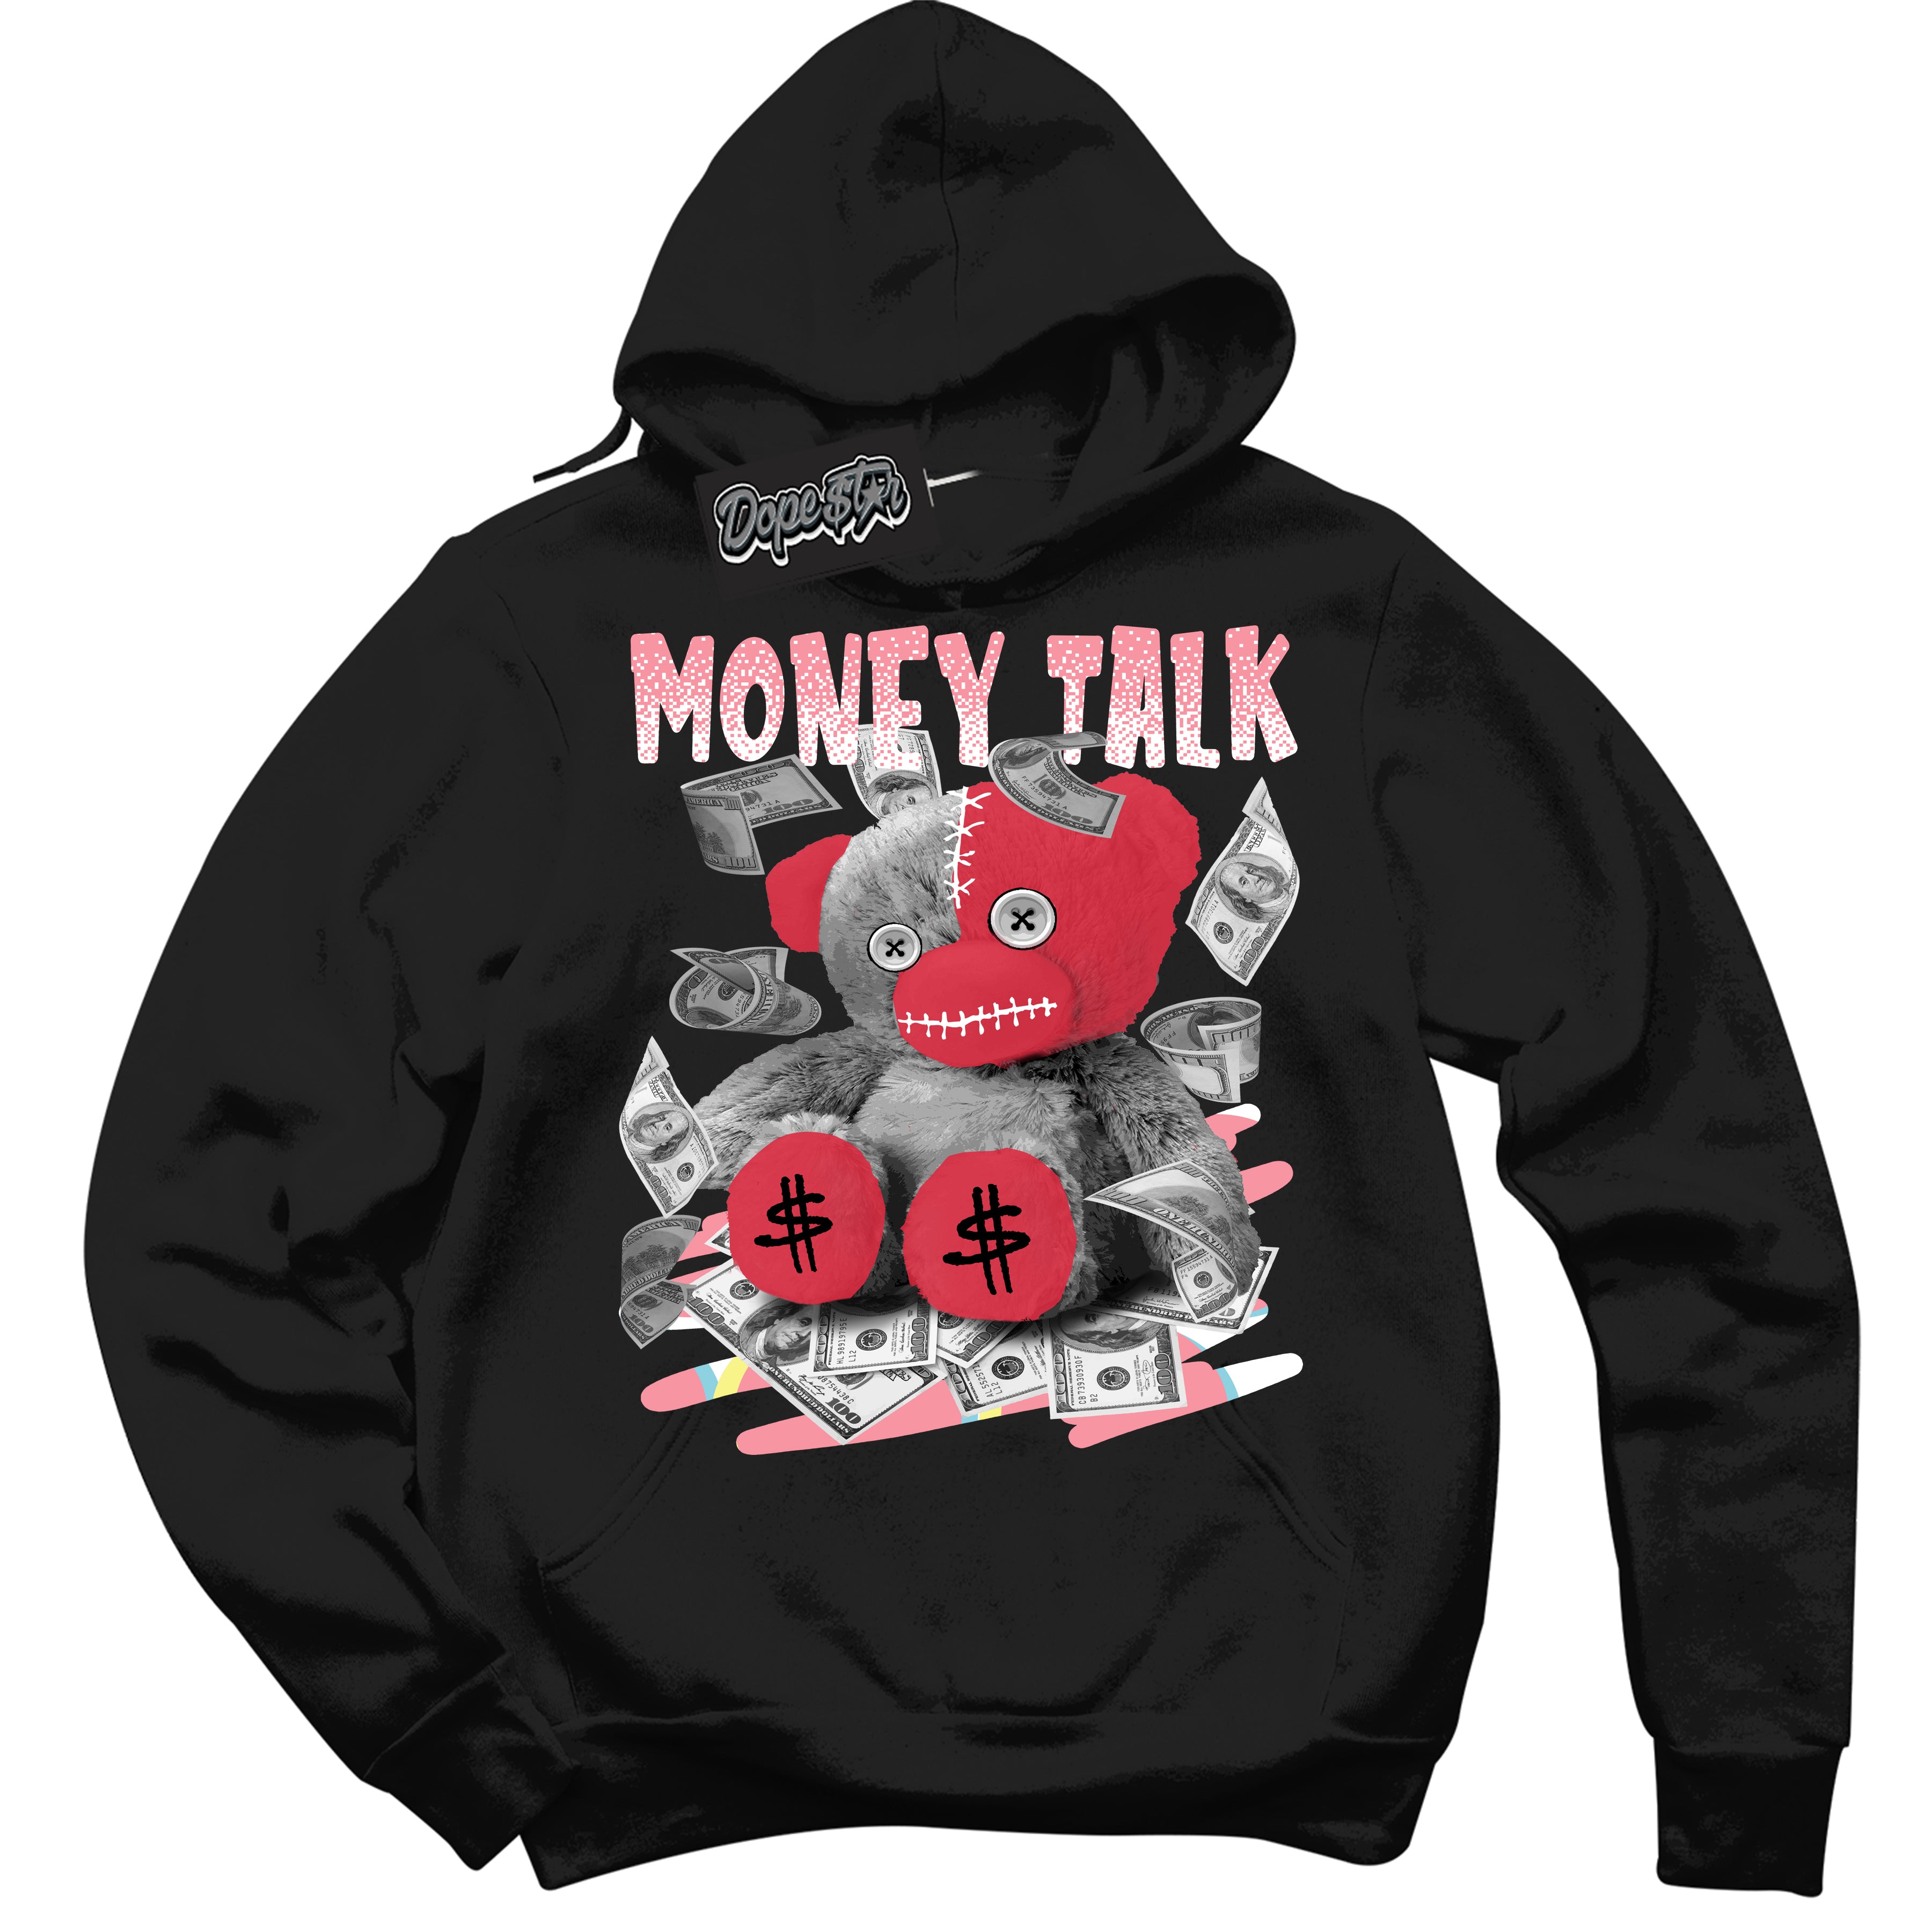 Cool Black Graphic DopeStar Hoodie with “ Money Talk Bear “ print, that perfectly matches Spider-Verse 1s sneakers